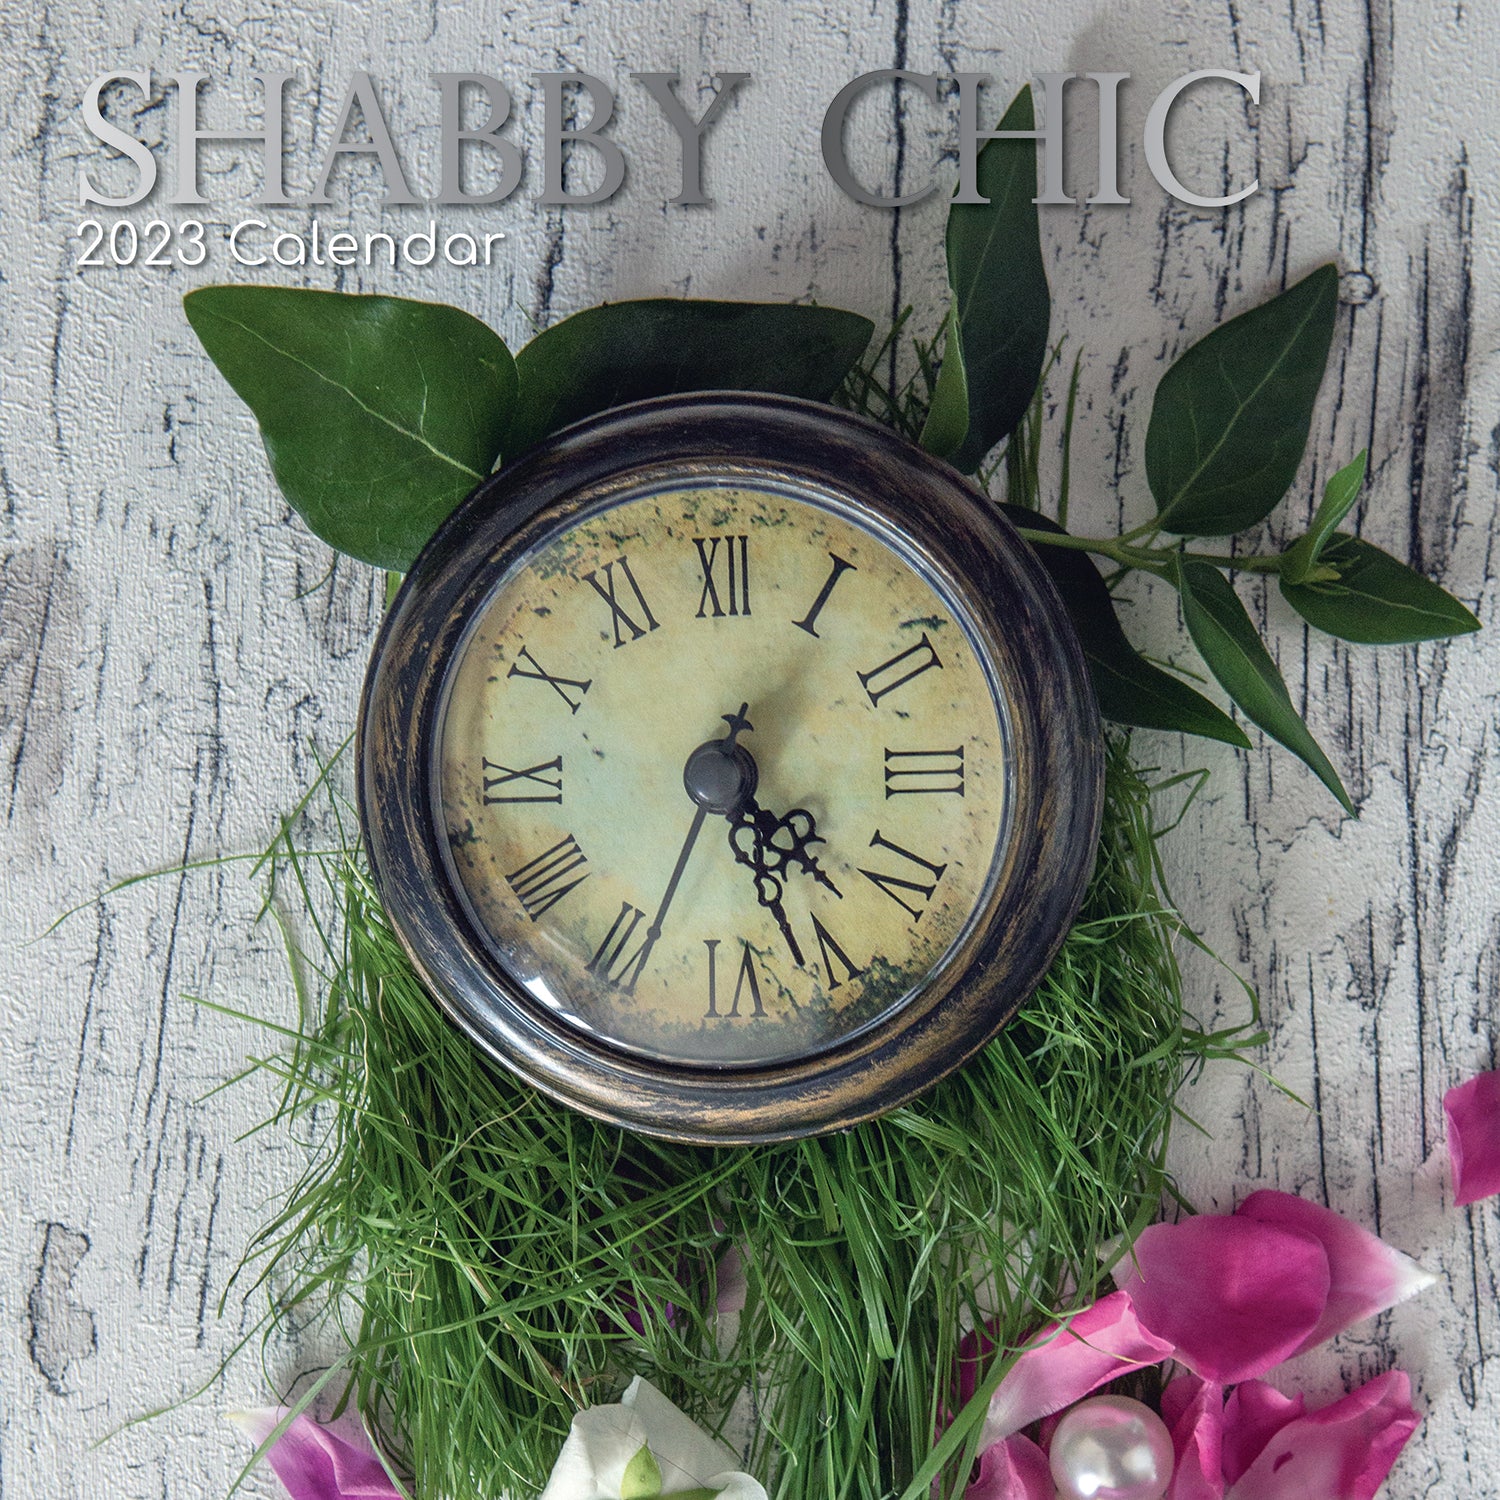 Shabby Chic - 2023 Square Wall Calendar 16 Month Lifestyle Planner New Year Gift - Zmart Australia